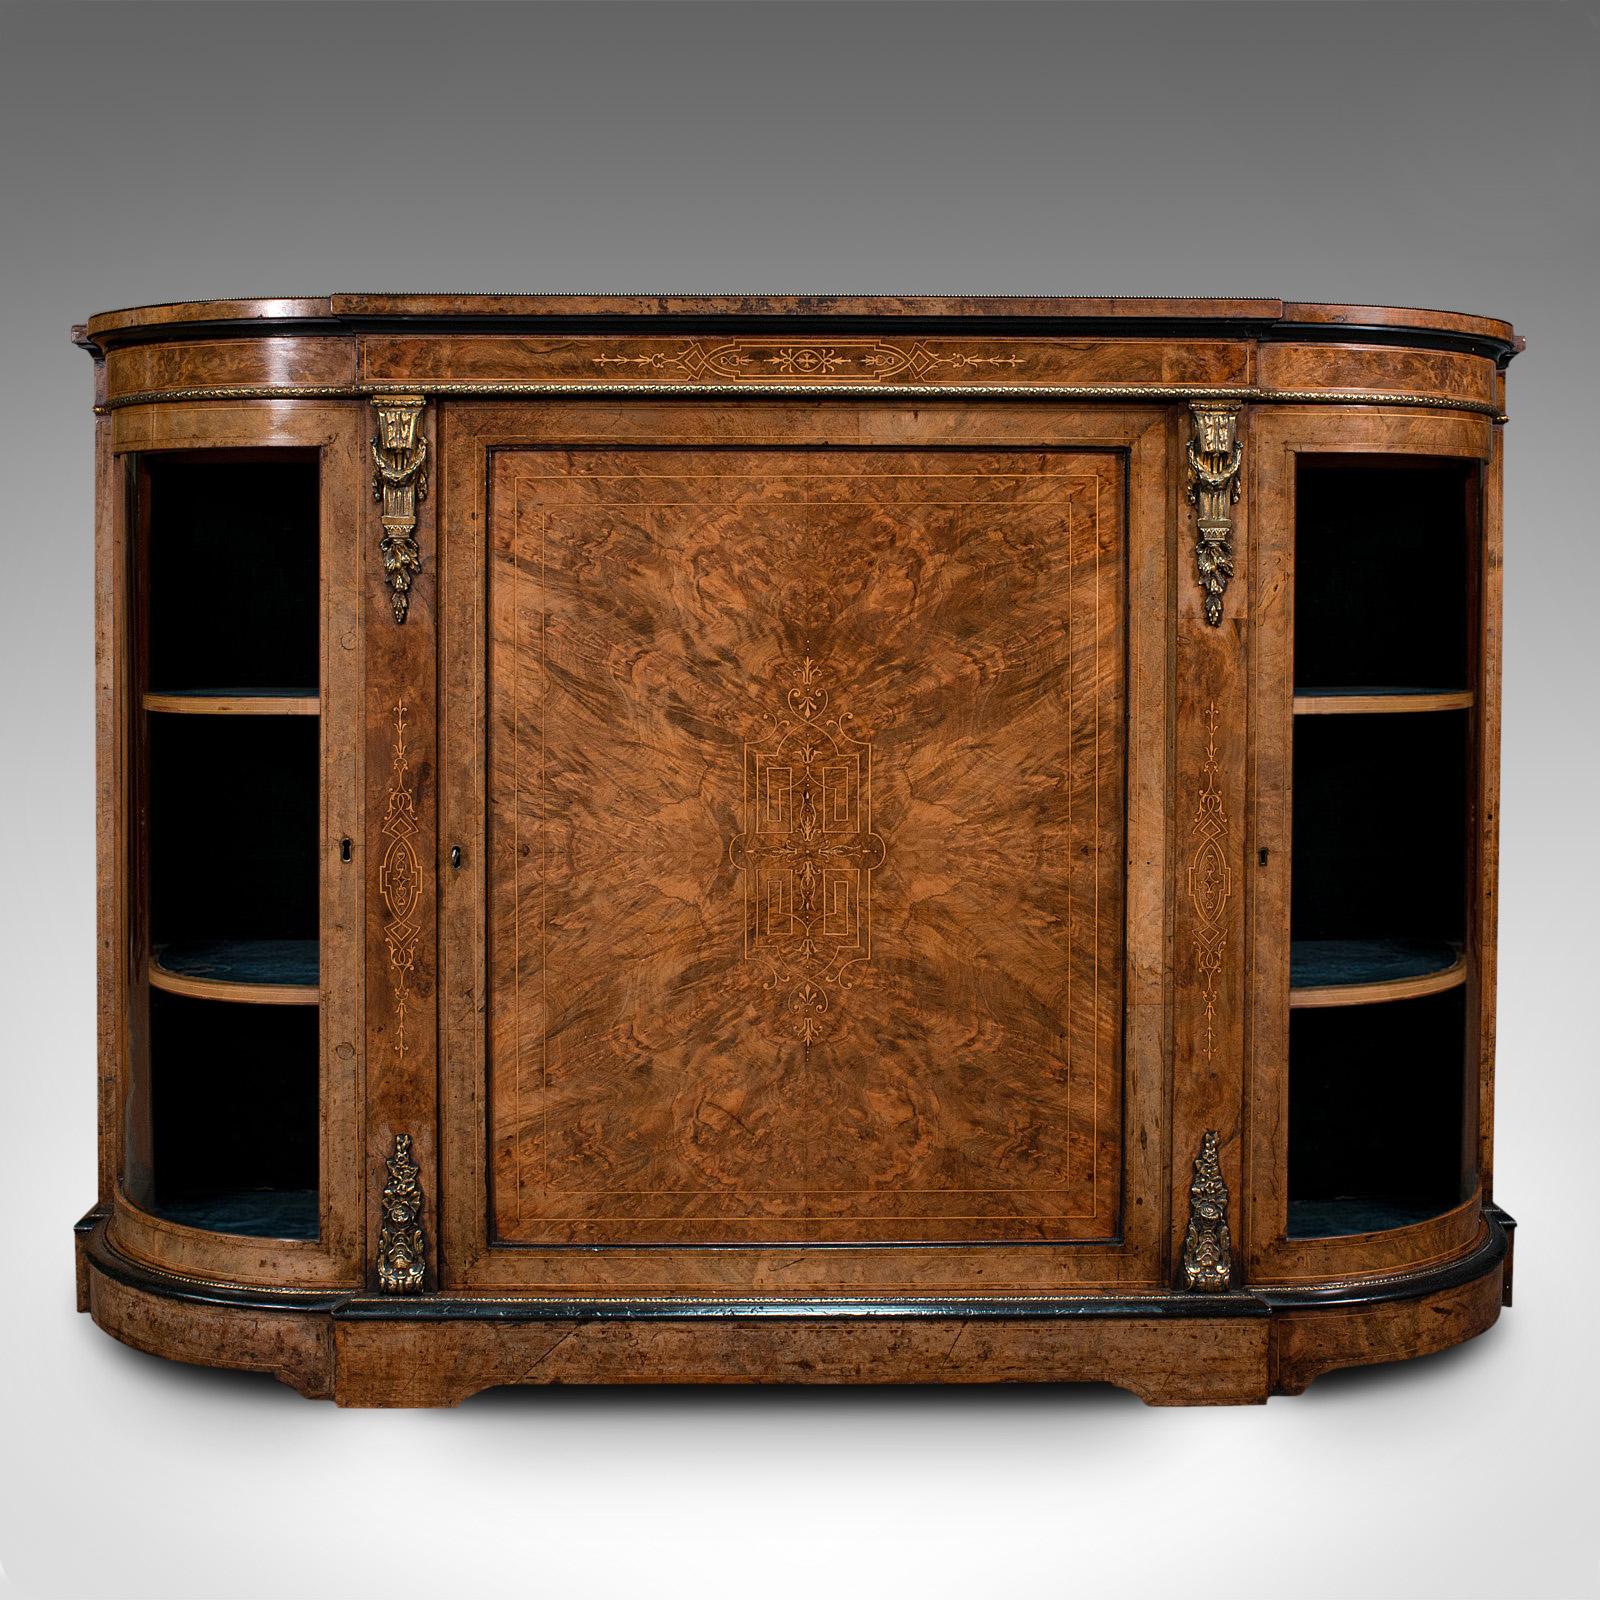 This is an antique credenza. An English, burr walnut sideboard or display cabinet, dating to the Regency period, circa 1820.

Striking craftsmanship testament to the inherent quality of this credenza
Displaying a desirable aged patina and